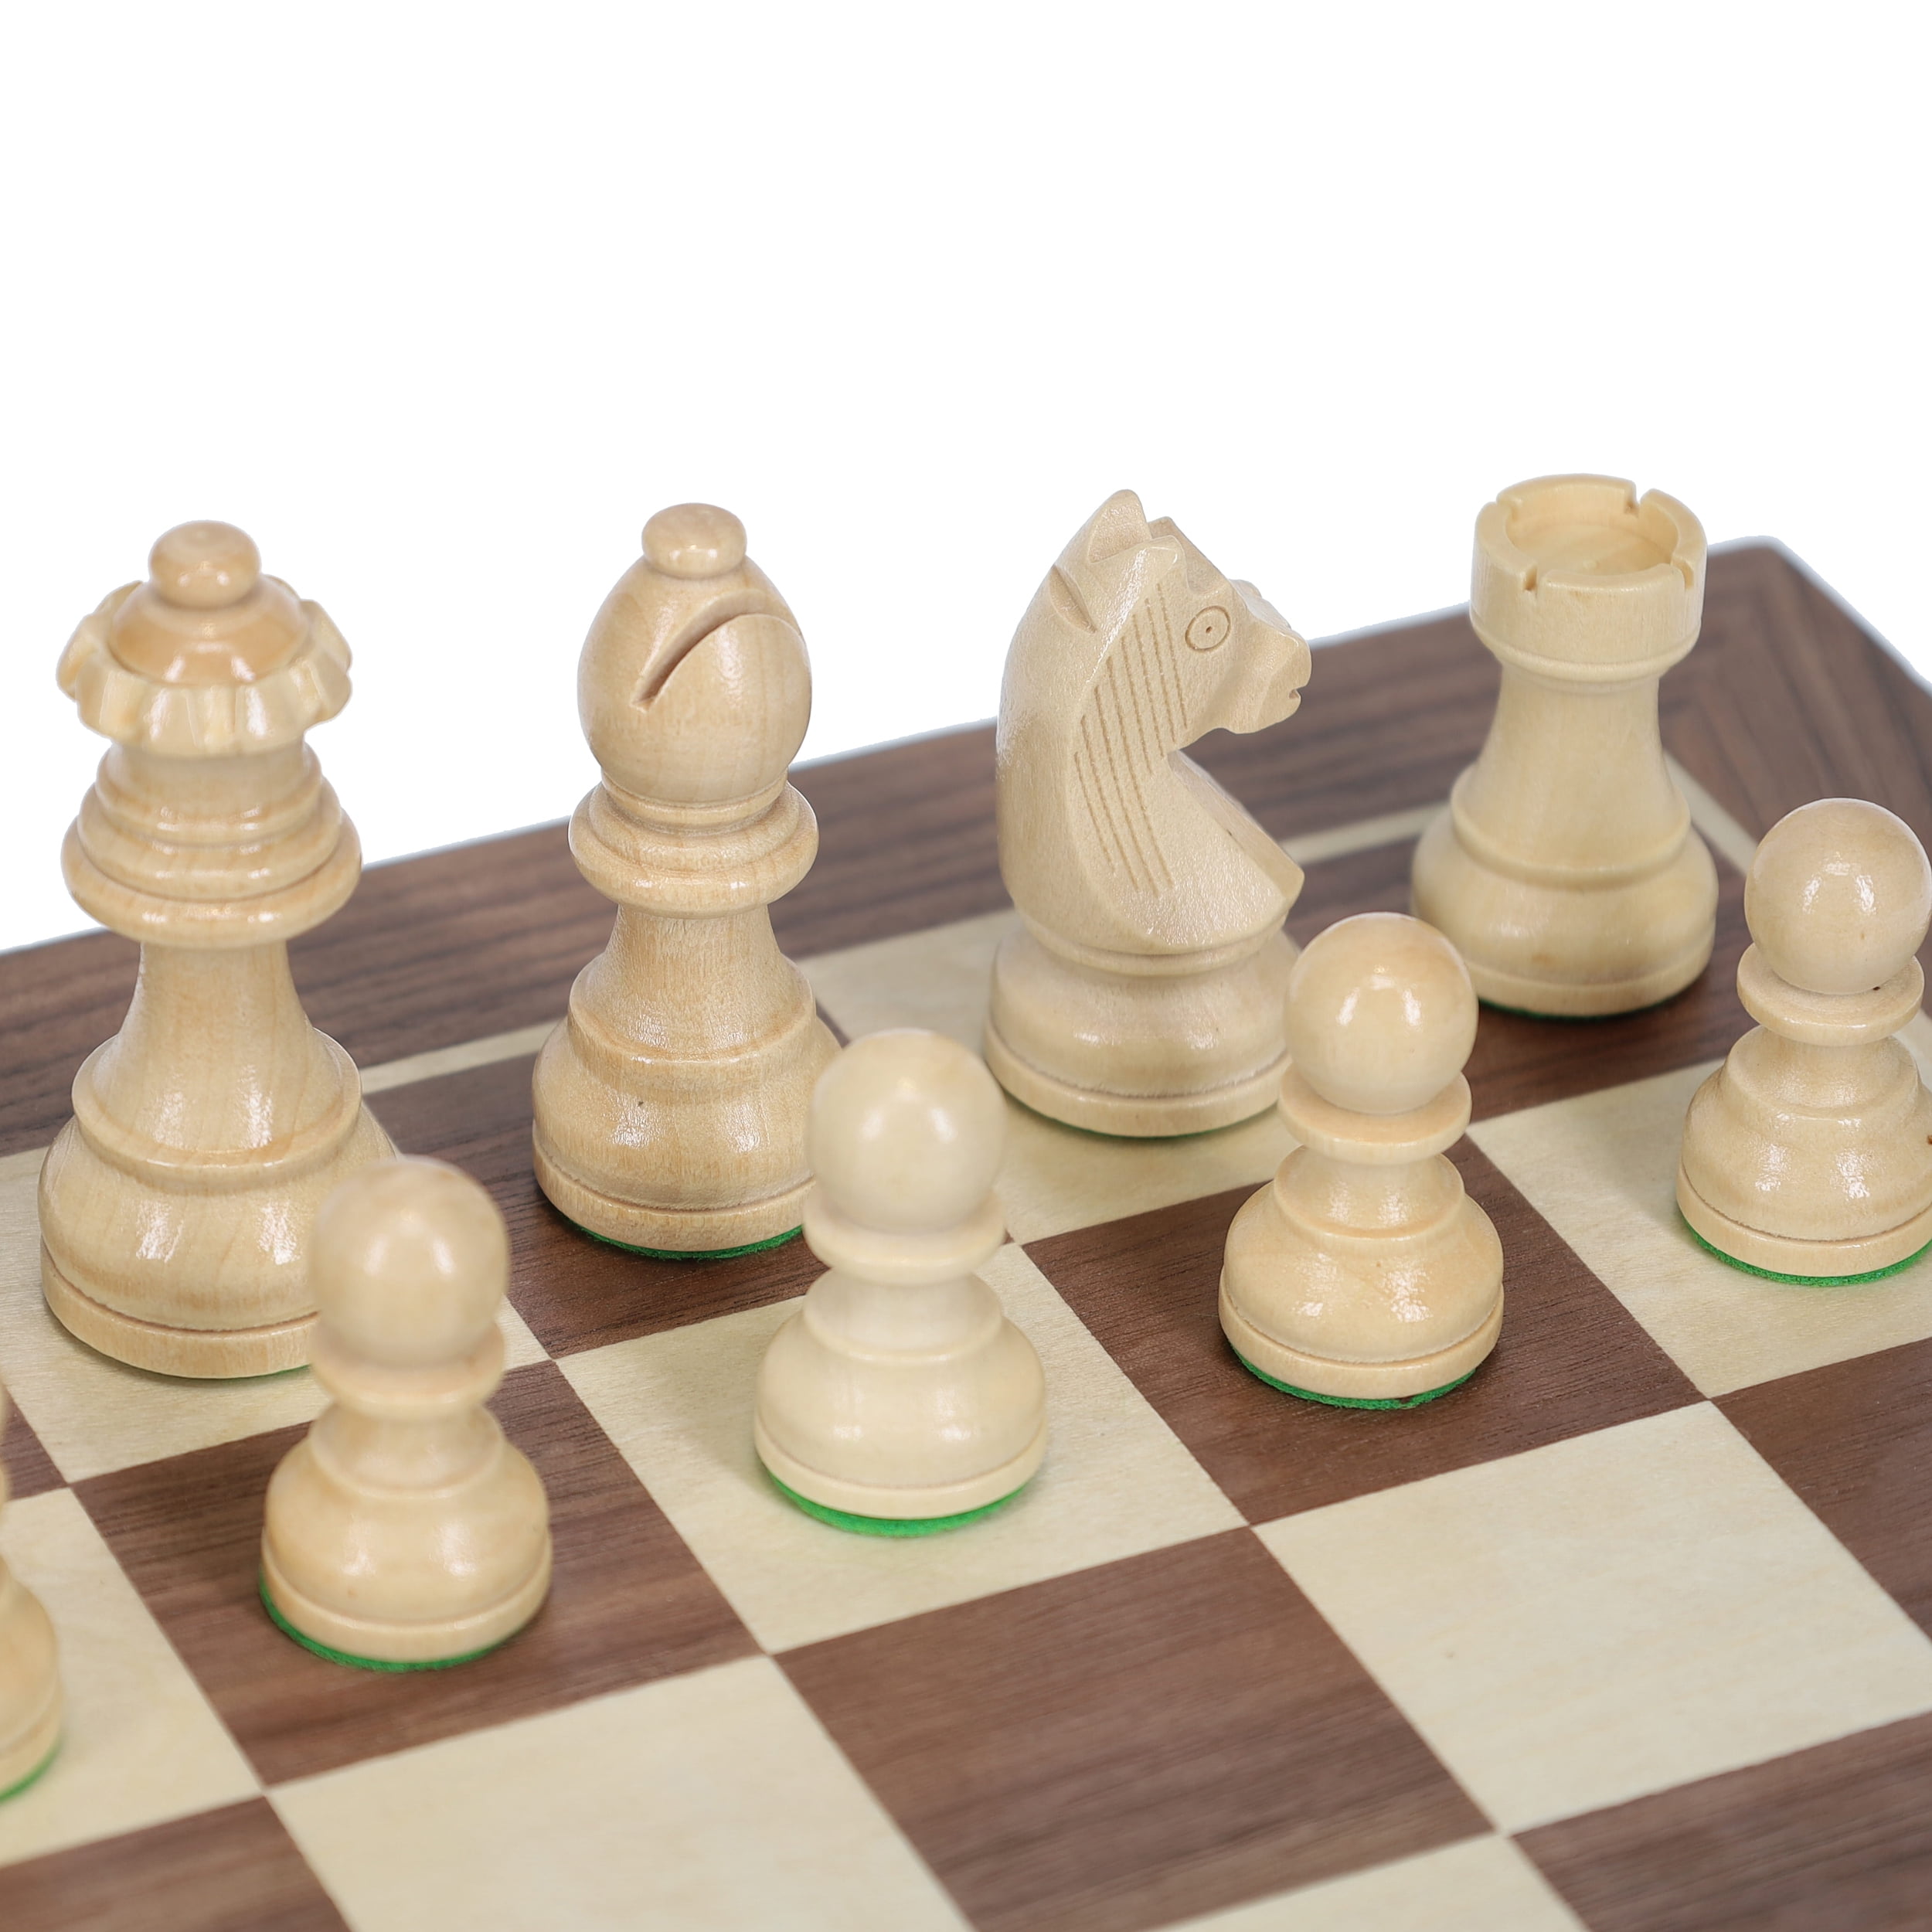 French Staunton Chess & Checkers Set – Wood Weighted Pieces, Brown